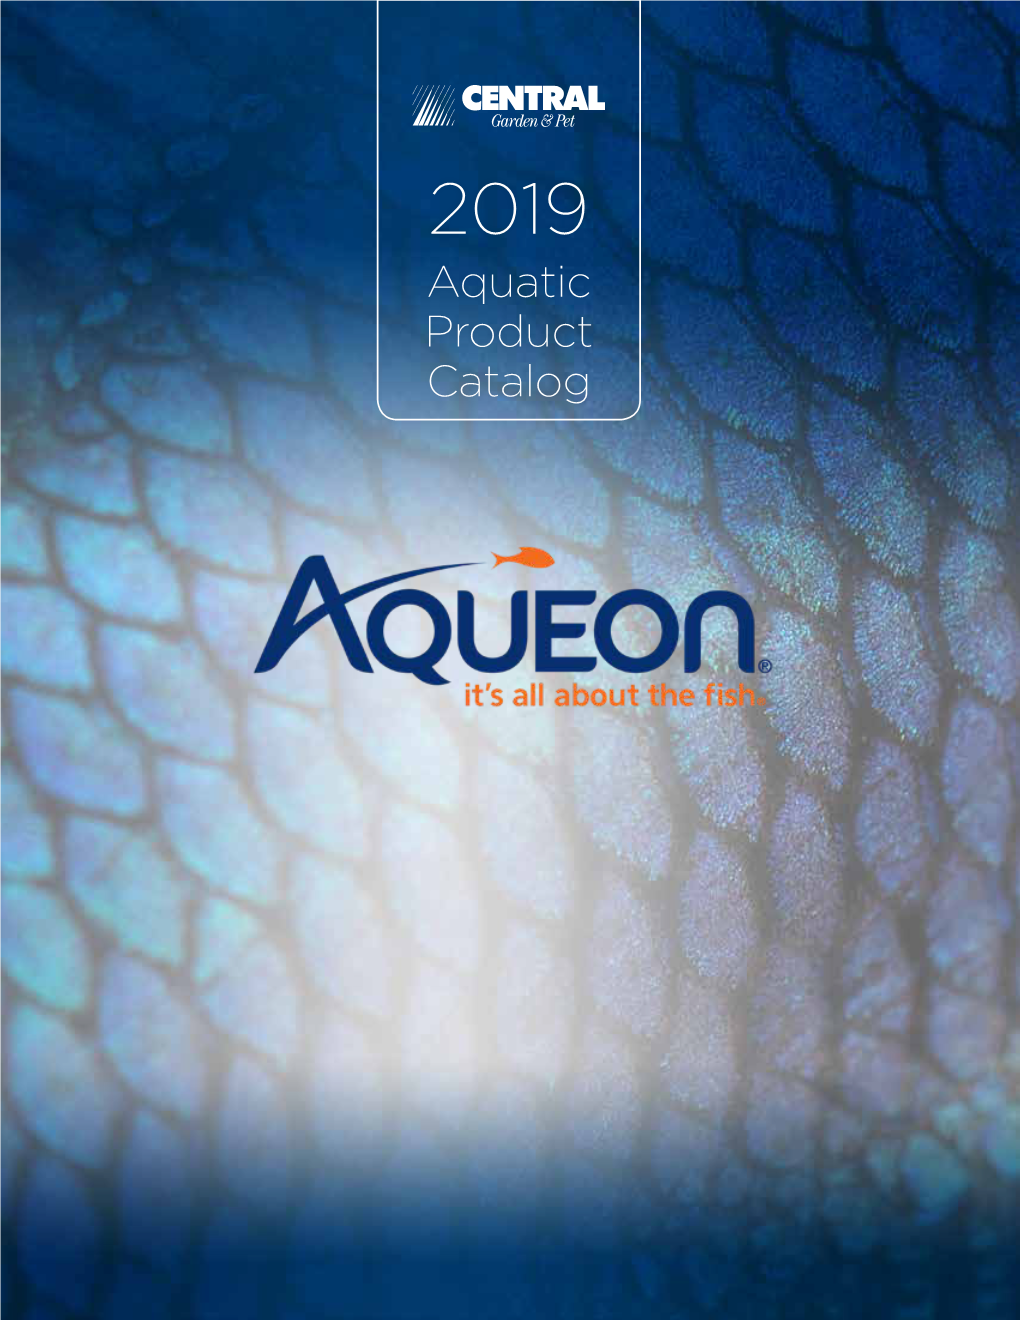 Aquatic Product Catalog See Page 26 for Details